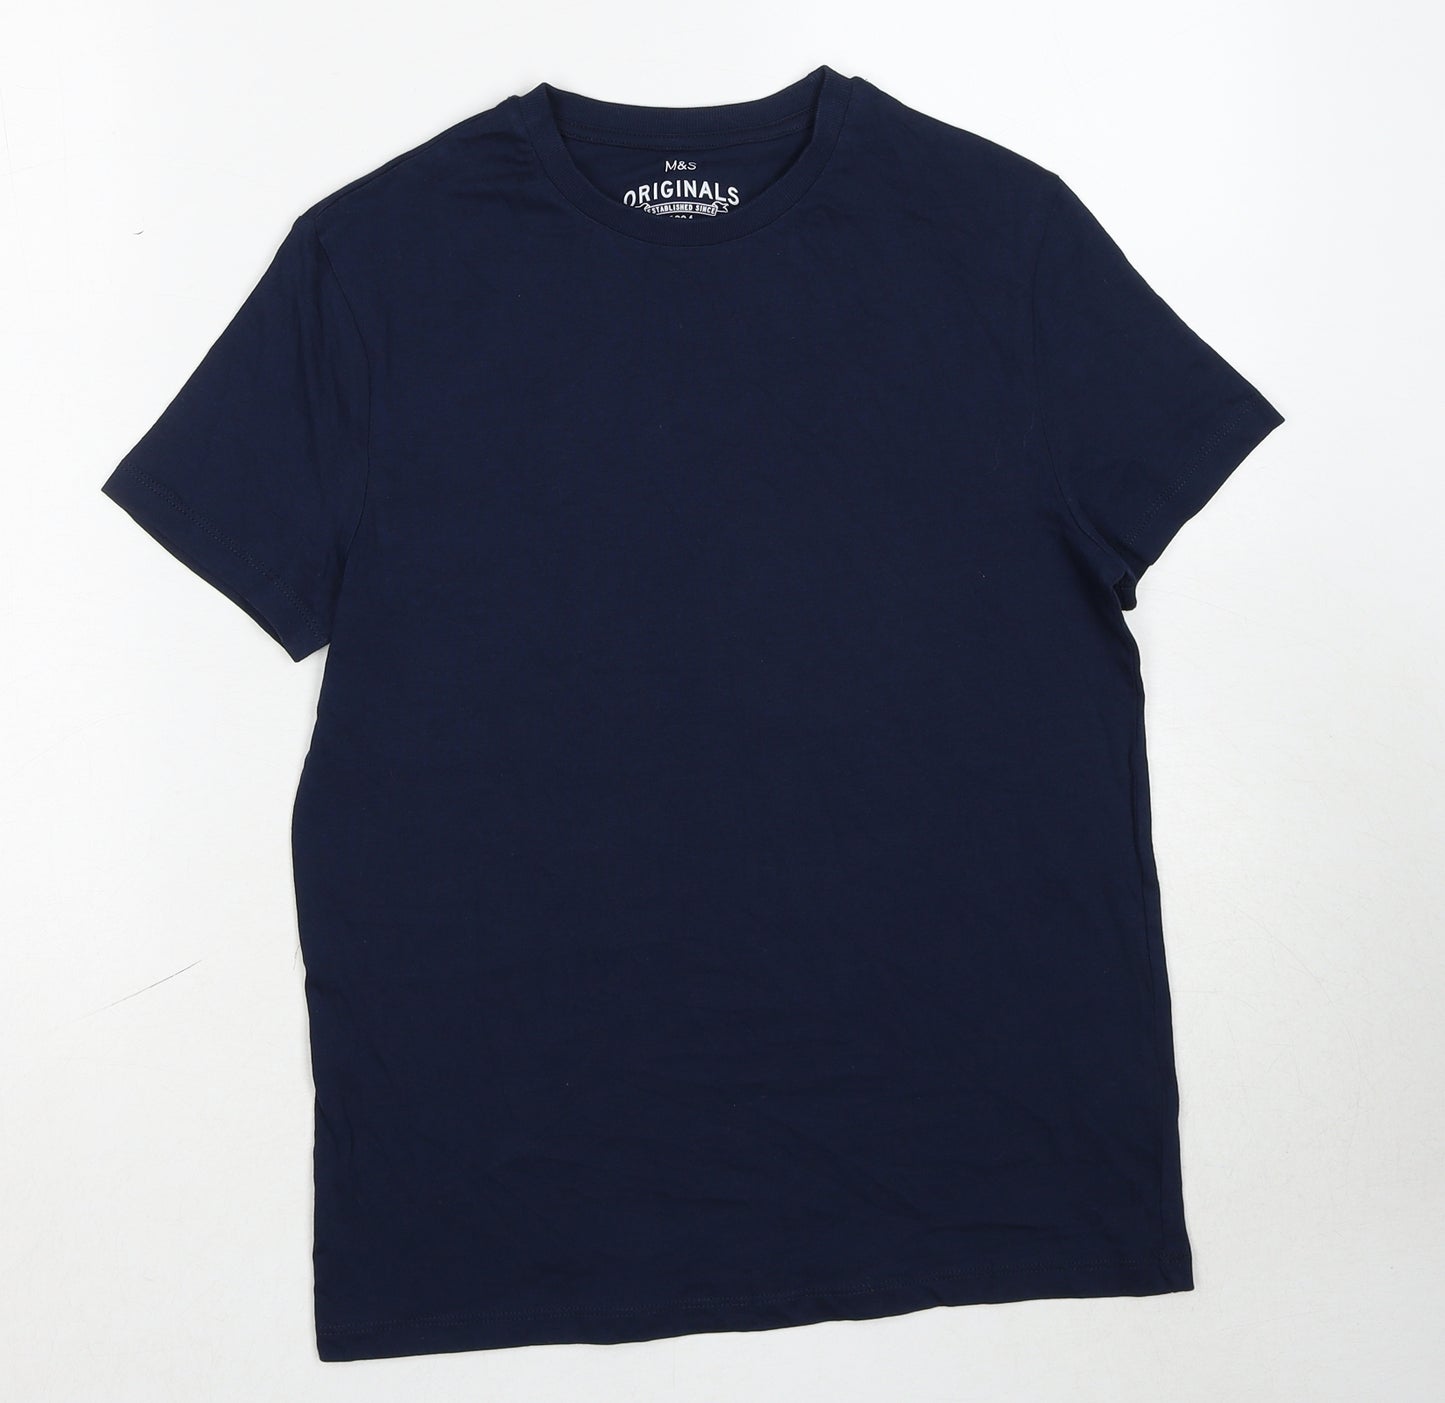 Marks and Spencer Boys Blue Cotton Basic T-Shirt Size 13-14 Years Round Neck Pullover